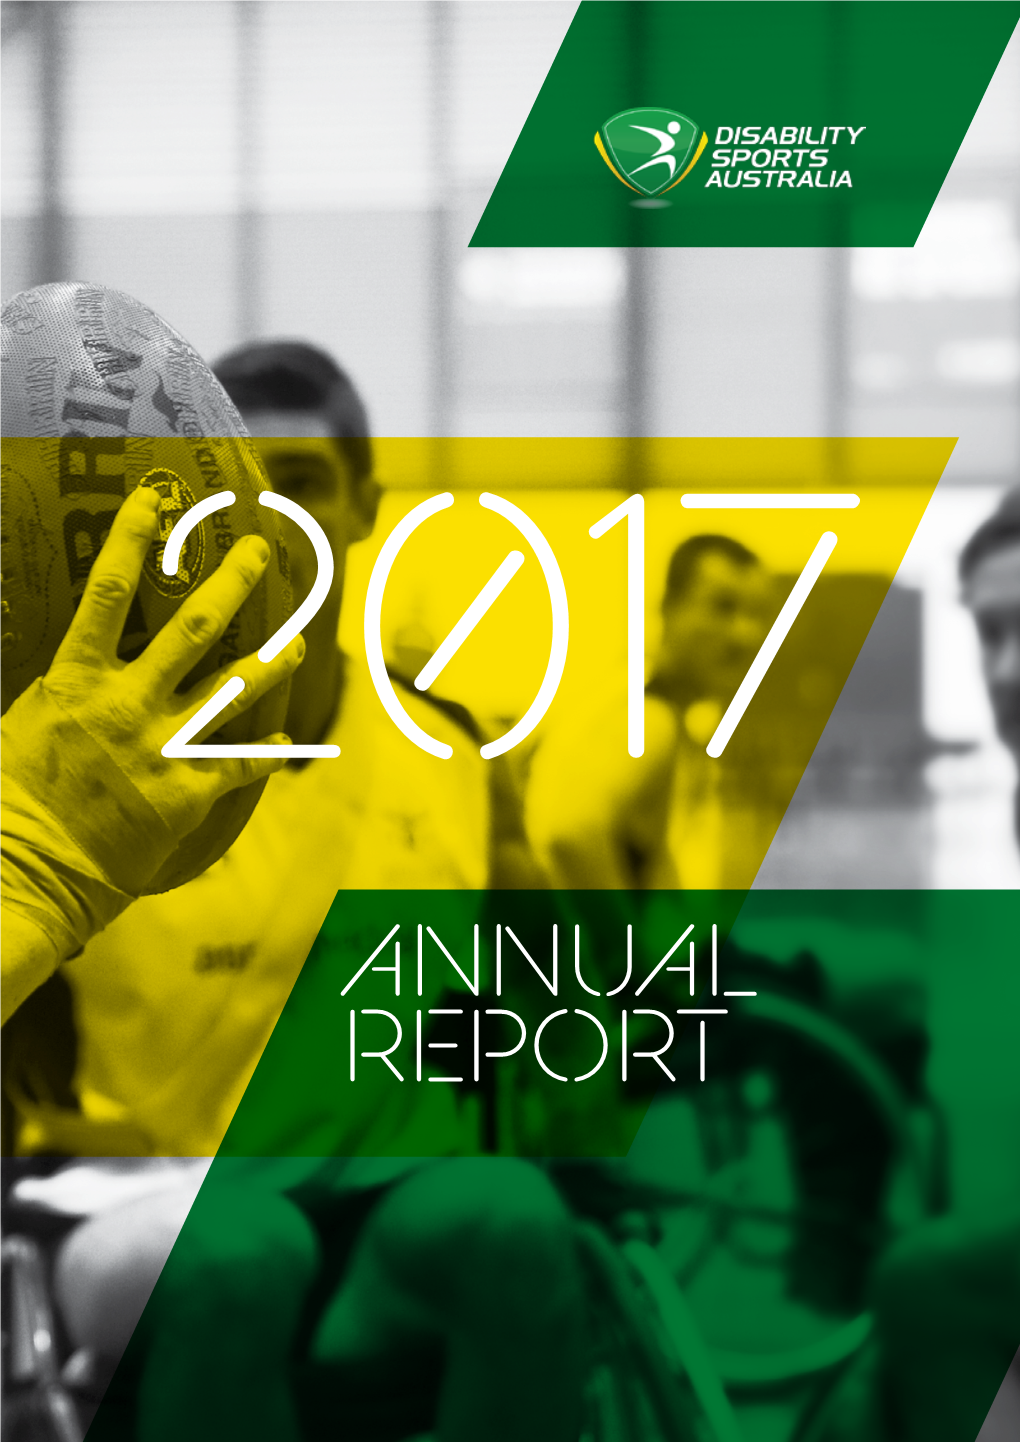 ANNUAL REPORT This Page and Cover: 2017 Wheelchair Aussie Rules National Championship TABLE of CONTENTS